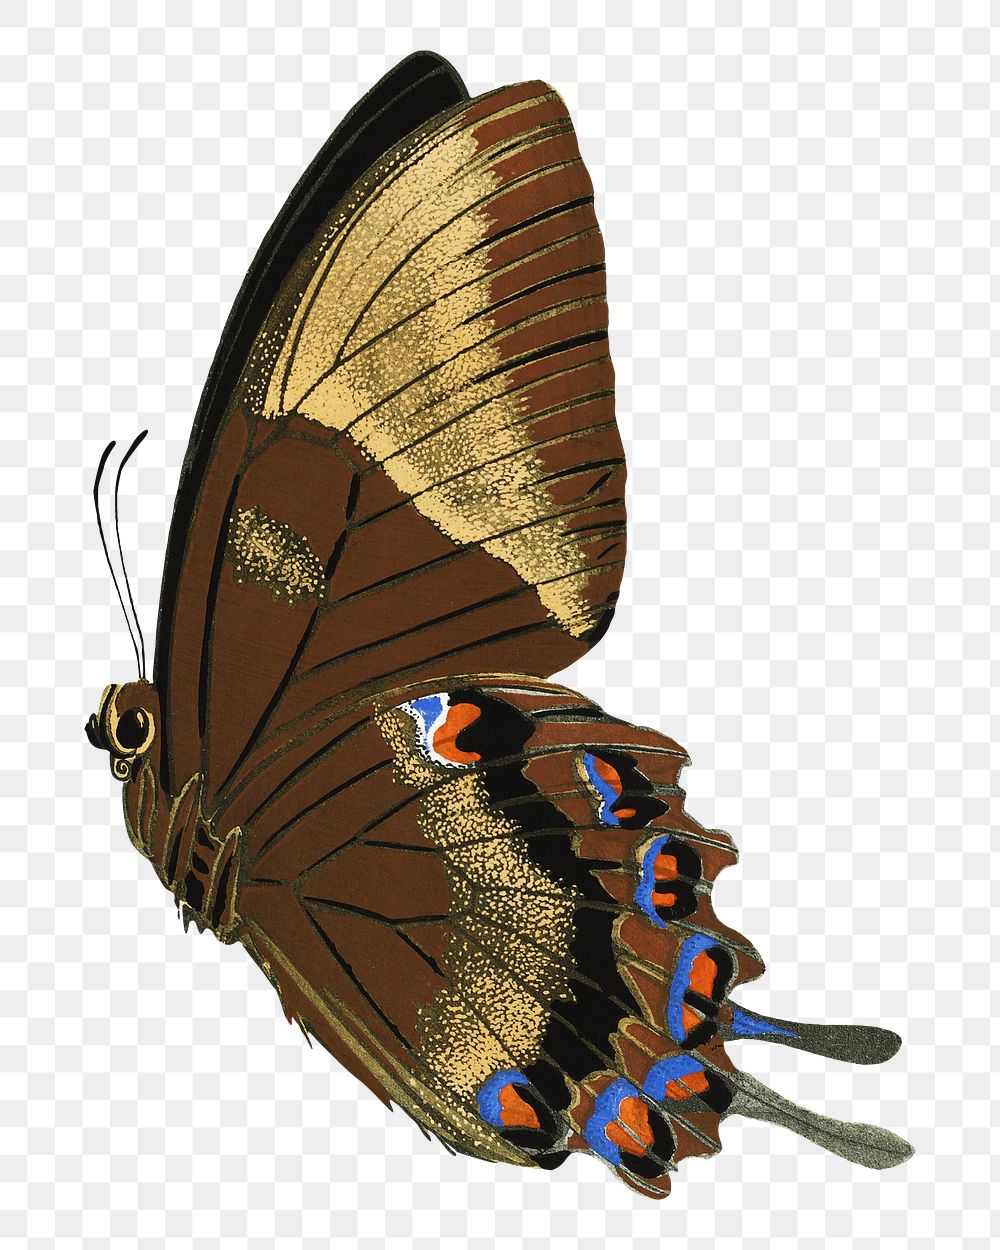 E.A. S&eacute;guy's butterfly png sticker, exotic insect on transparent background.  Remixed by rawpixel